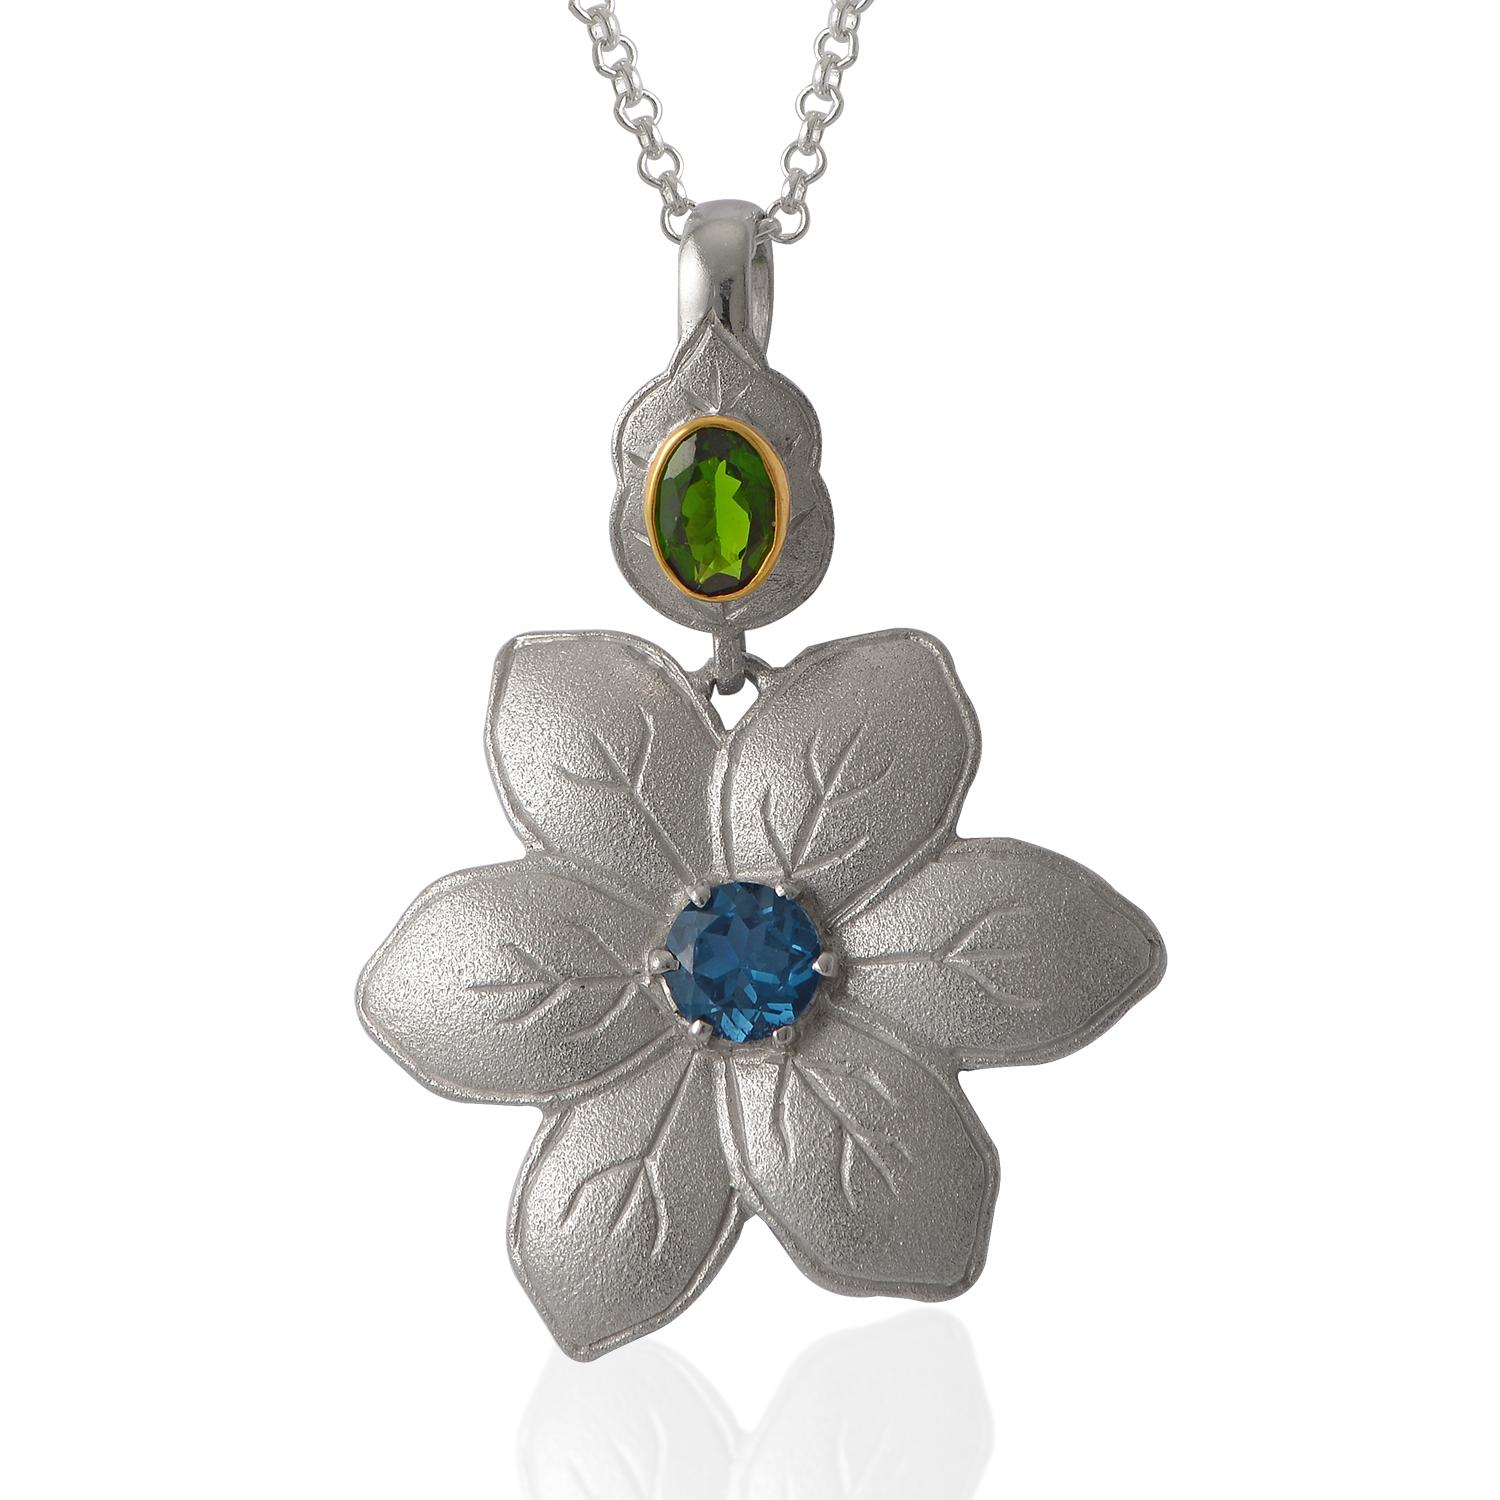 This lovely Blue Topaz Chrome Diopside 18 Karat Gold Silver Flower Pendant, has been handmade in our workshops. It is made of frosted sterling silver and has hand engraved petals. The central stone is a london blue topaz and the pendant is capped